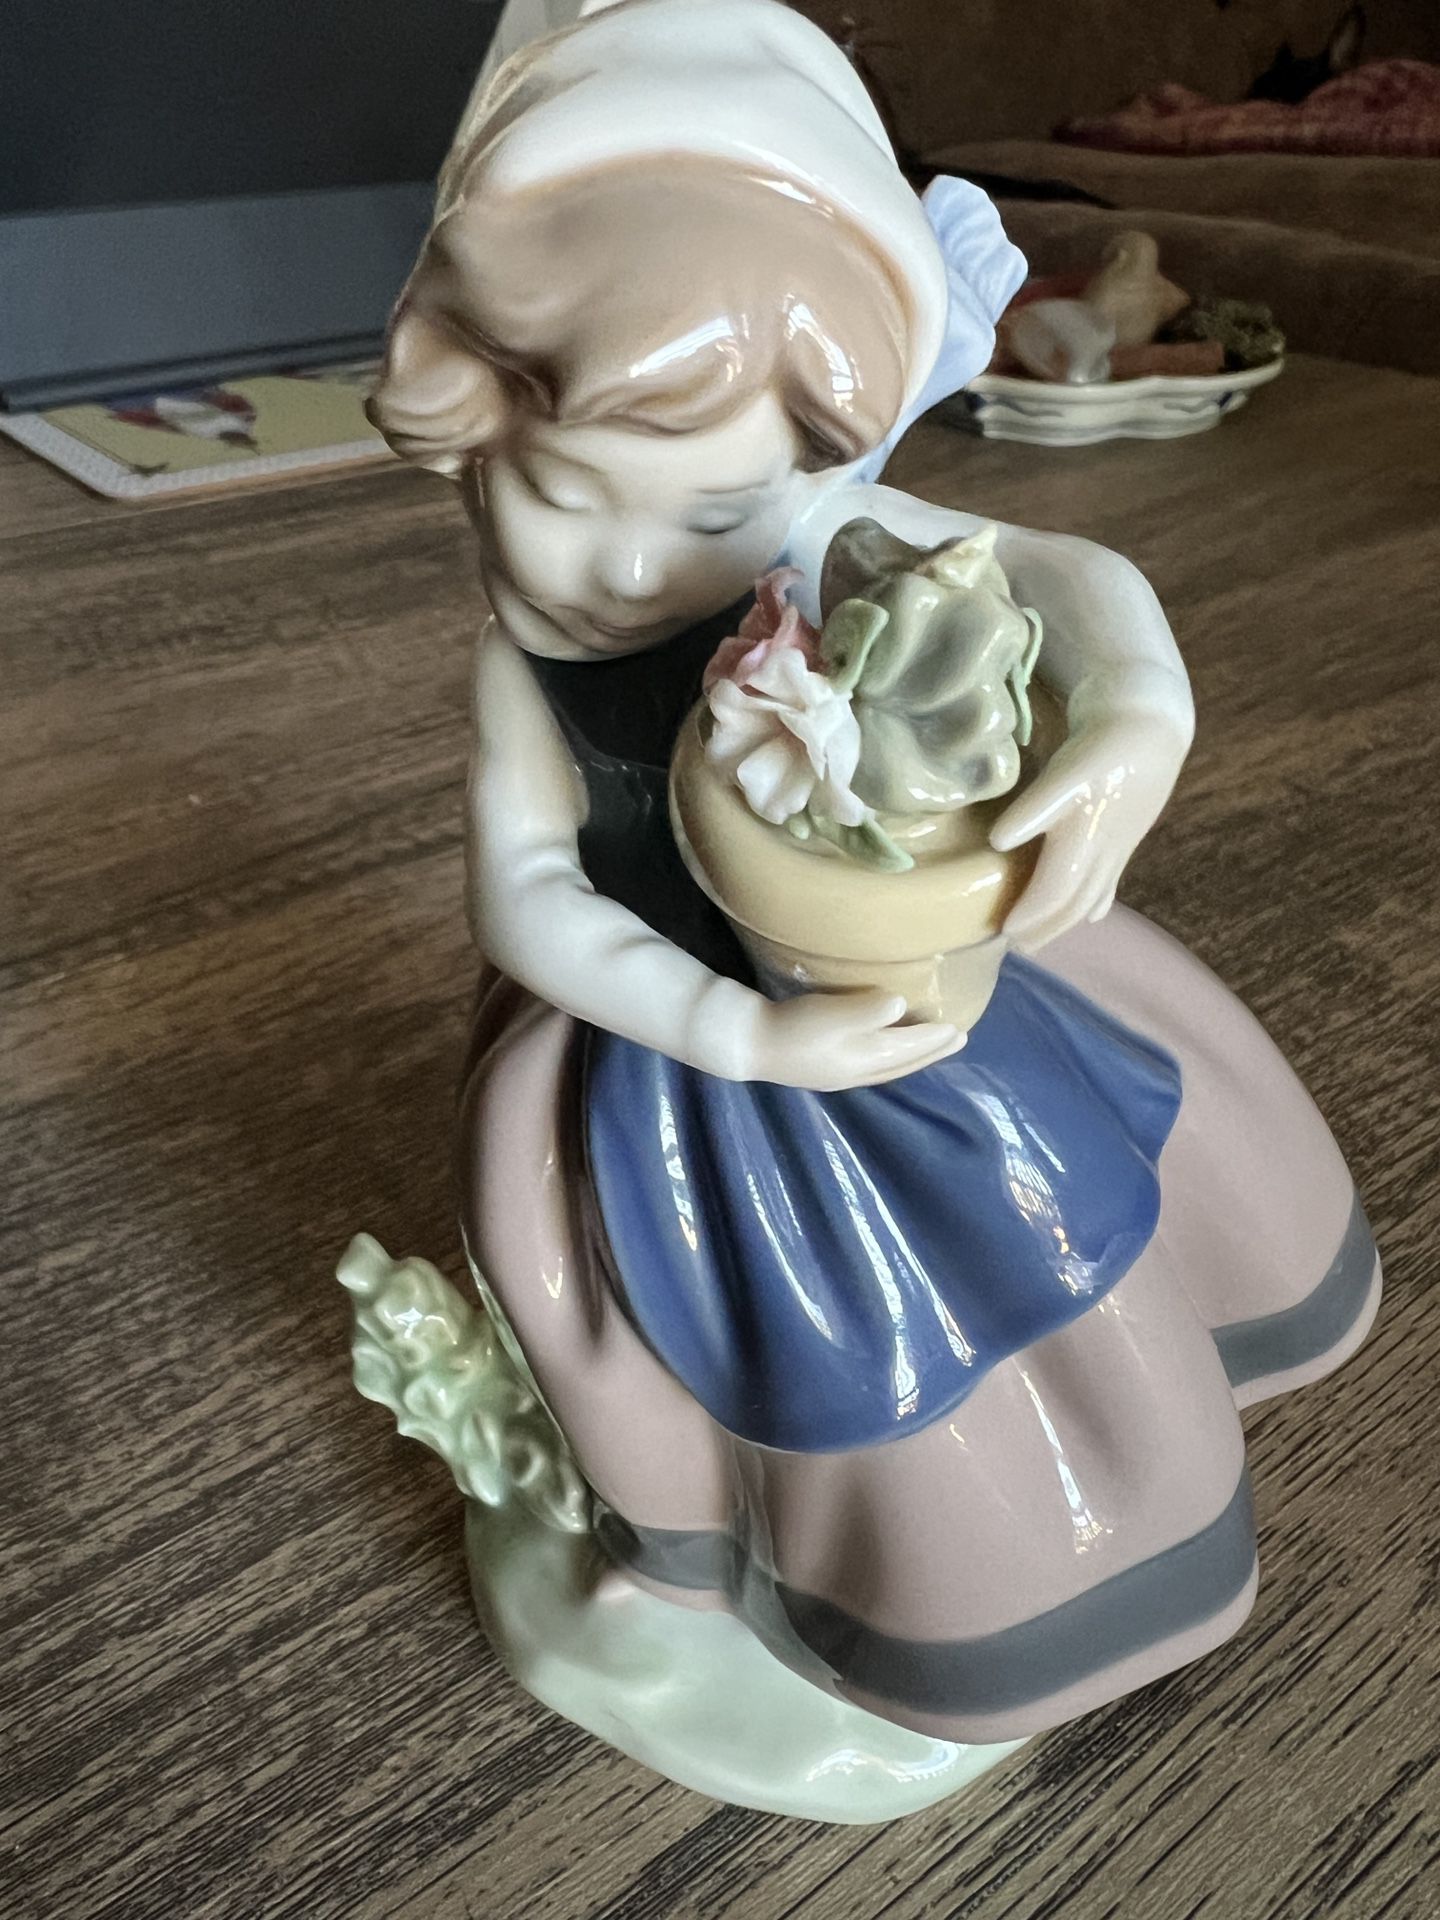 LLADRO FIGURINE “ LITTLE GIRL WITH FLOWERSPRE-Owned. CONDITION -VERY Good 